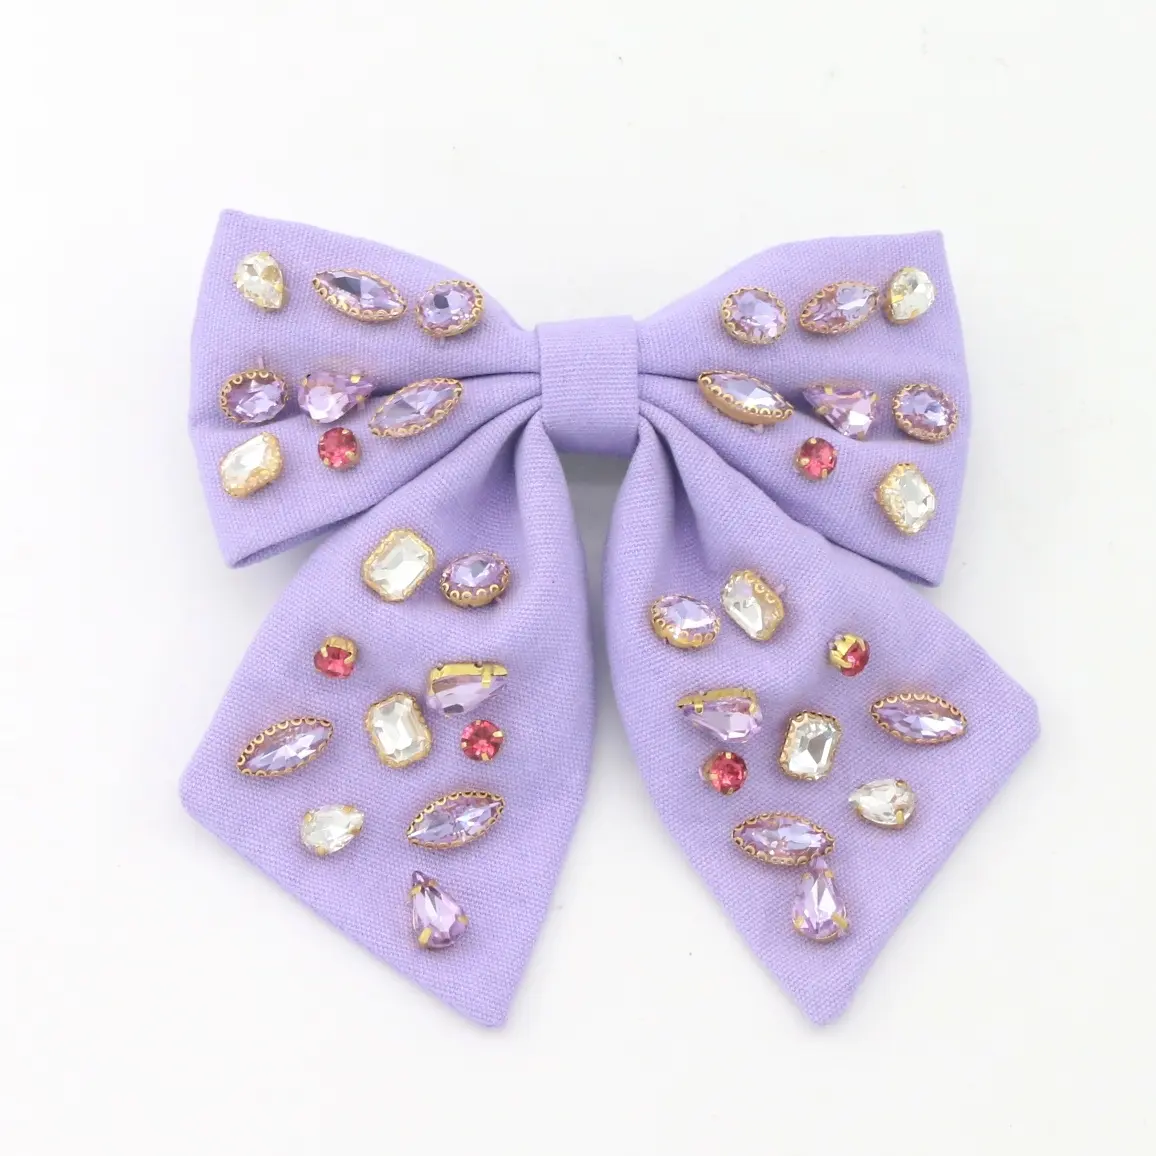 Vintage Bow Denim Fabric With Colored Crystals Pearl French Spring Hair Accessories For Girls